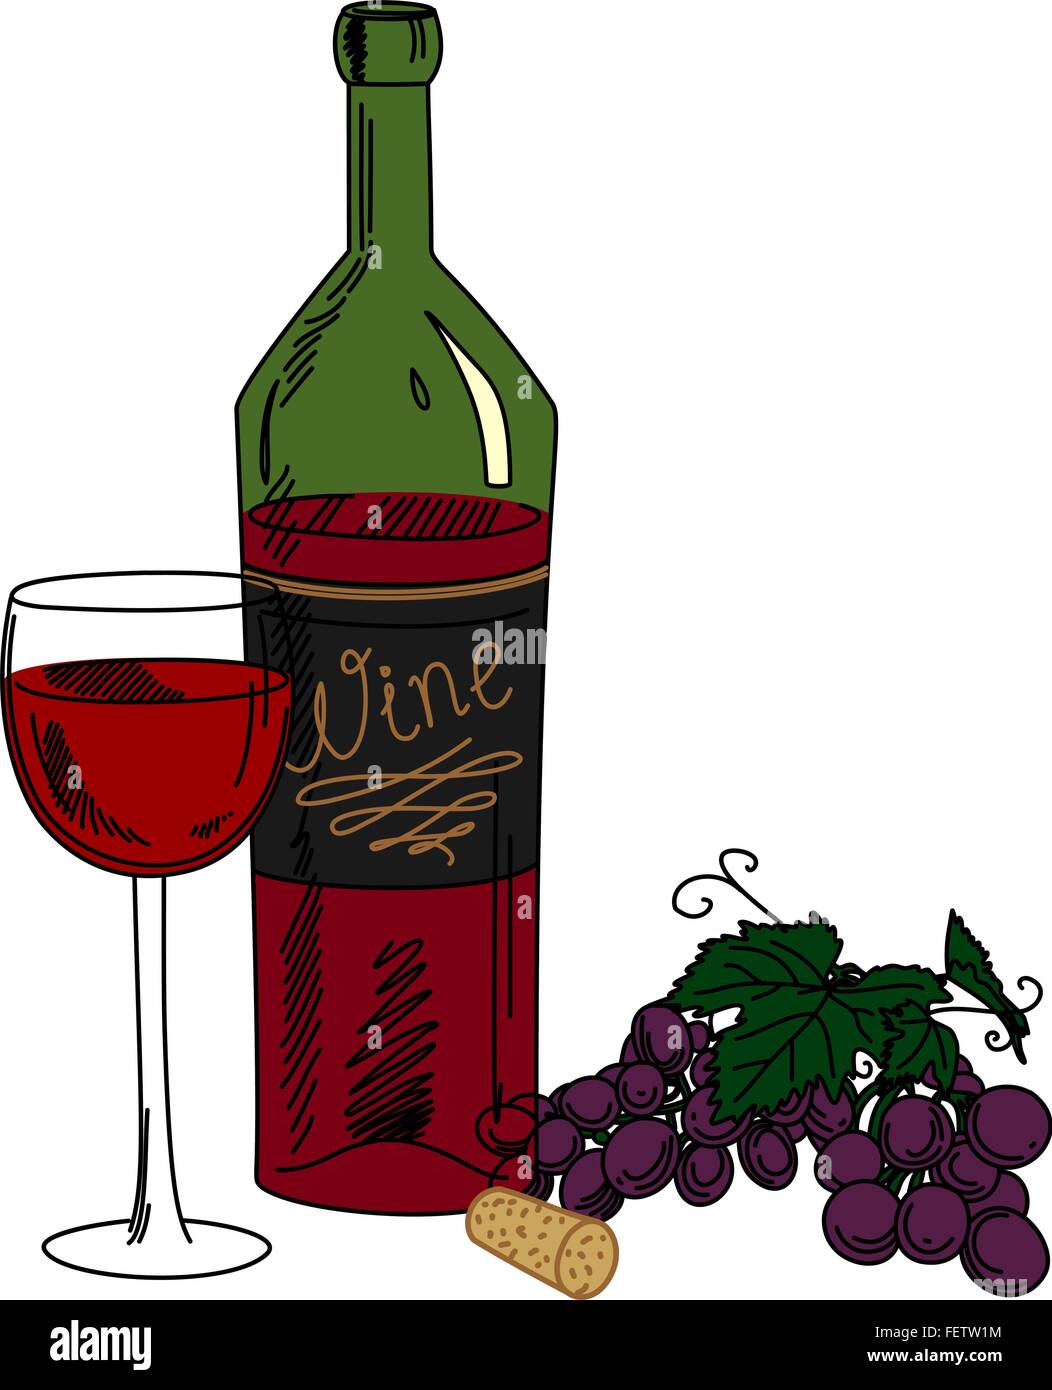 Bottle of wine, grapes and a glass Stock Vector